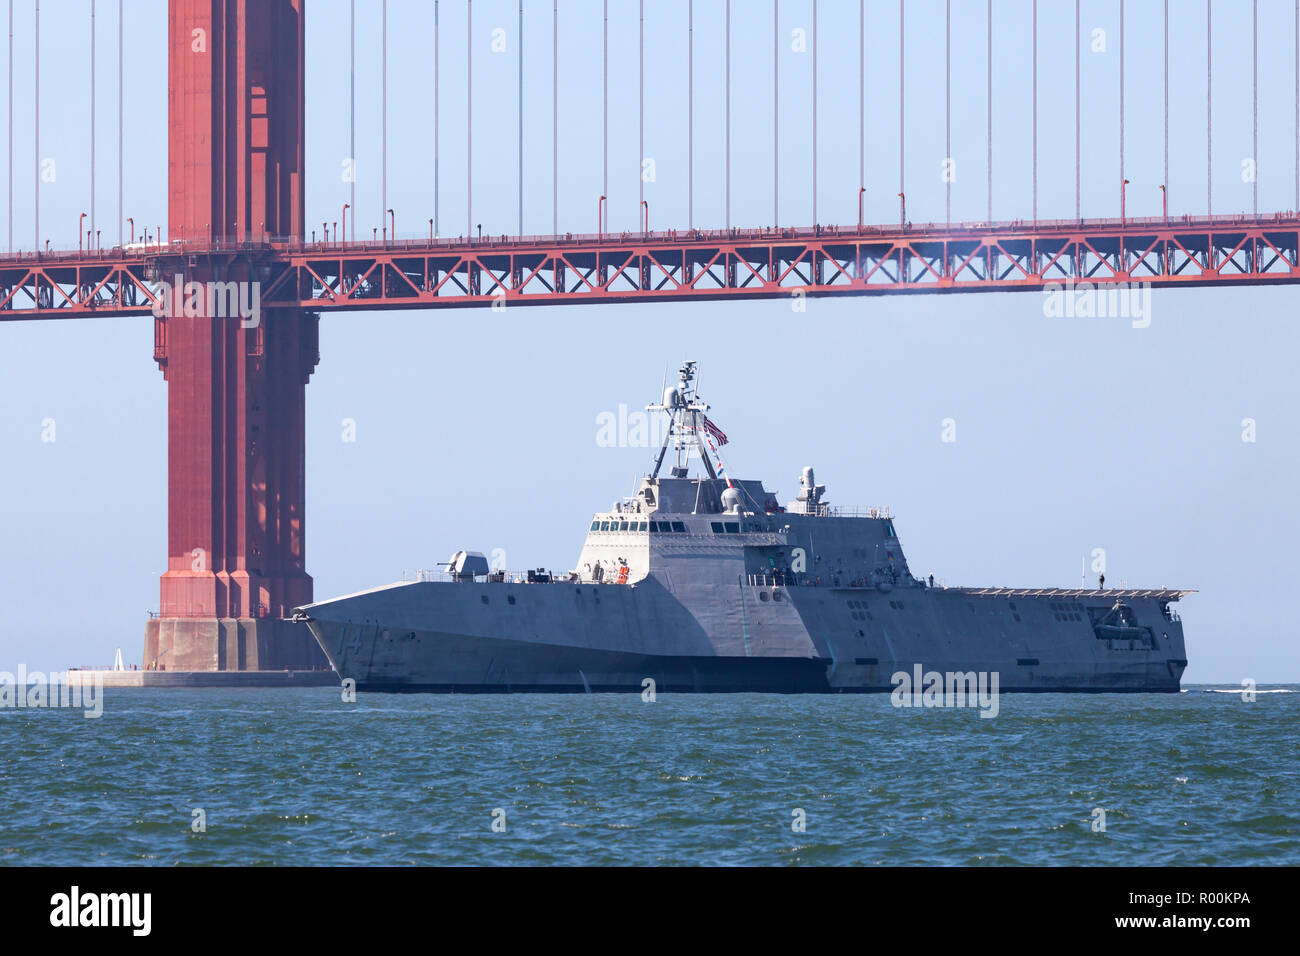 The Independence class littoral combat ship USS Manchester (LCS 14) enters San Francisco Bay. Stock Photo